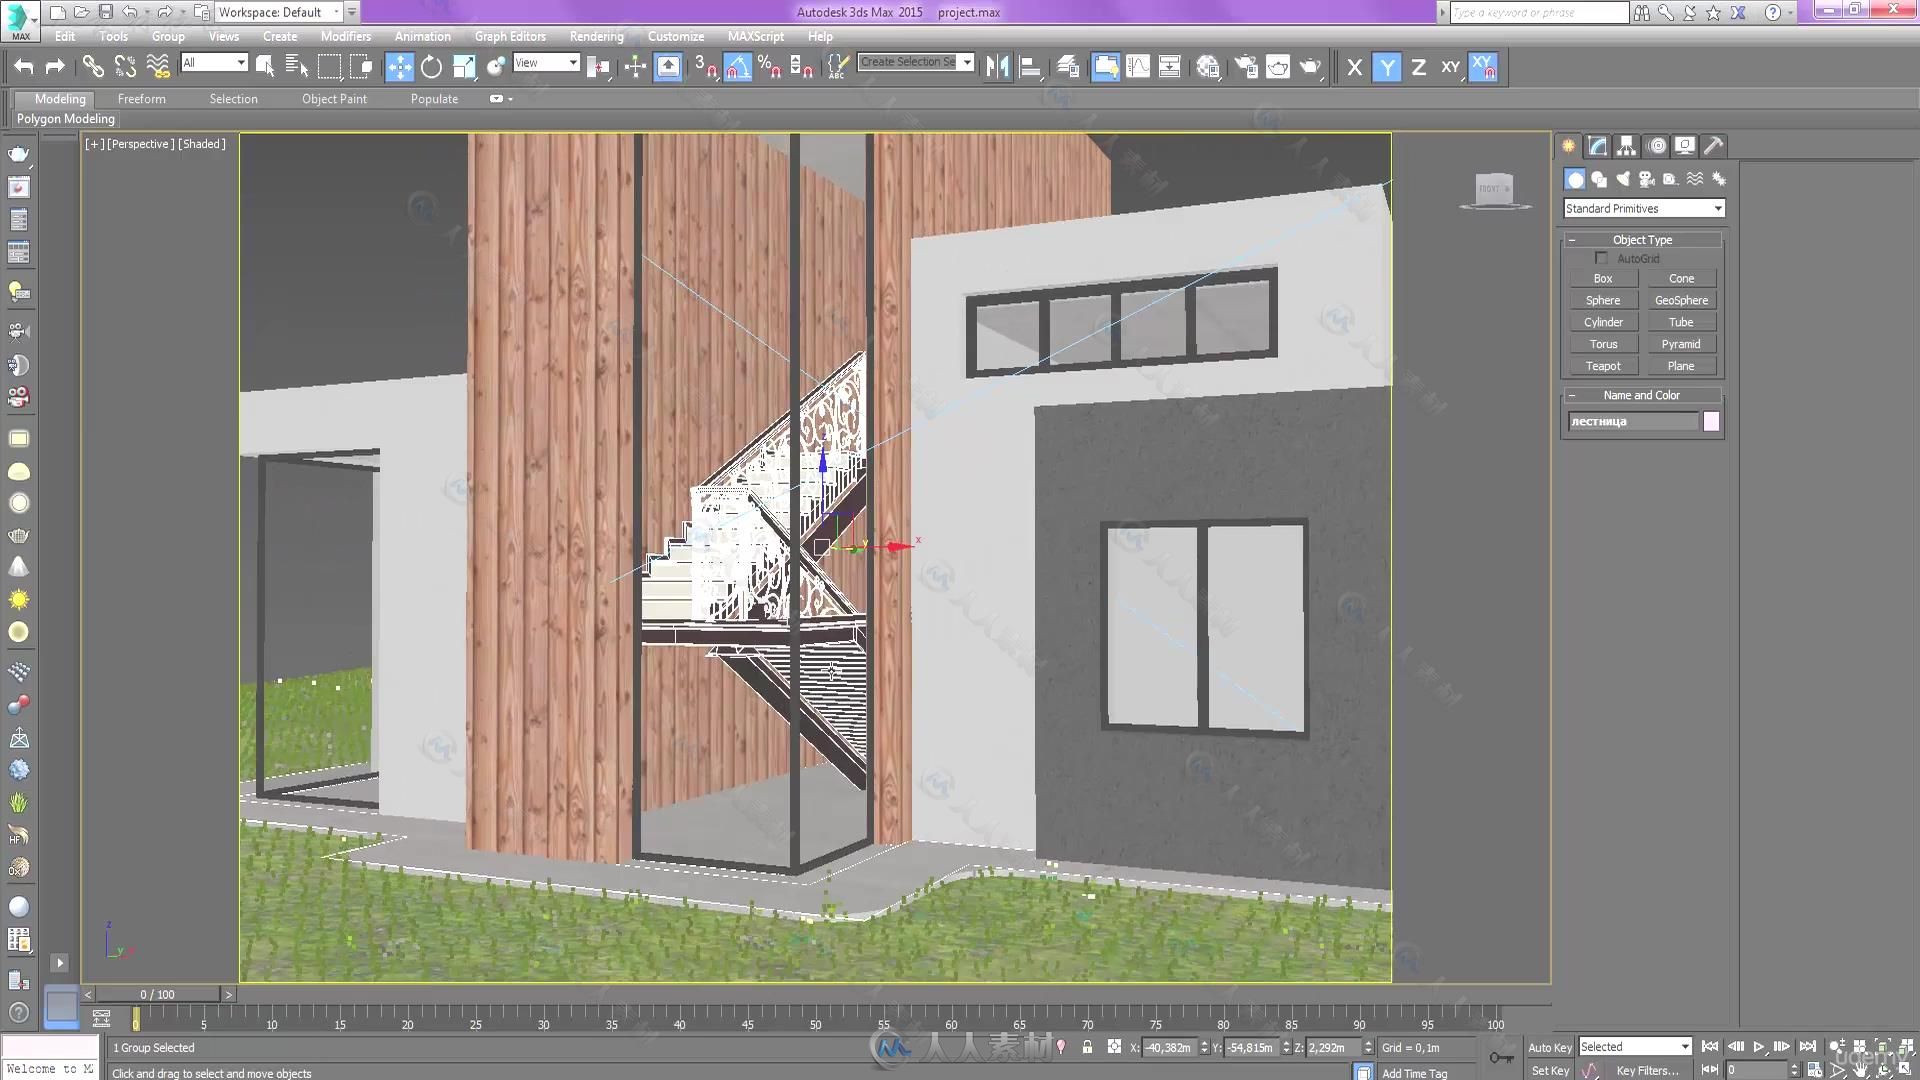 3dsmax林中房屋建筑可视化视频教程 Udemy Learn 3ds max and vray Making of House...